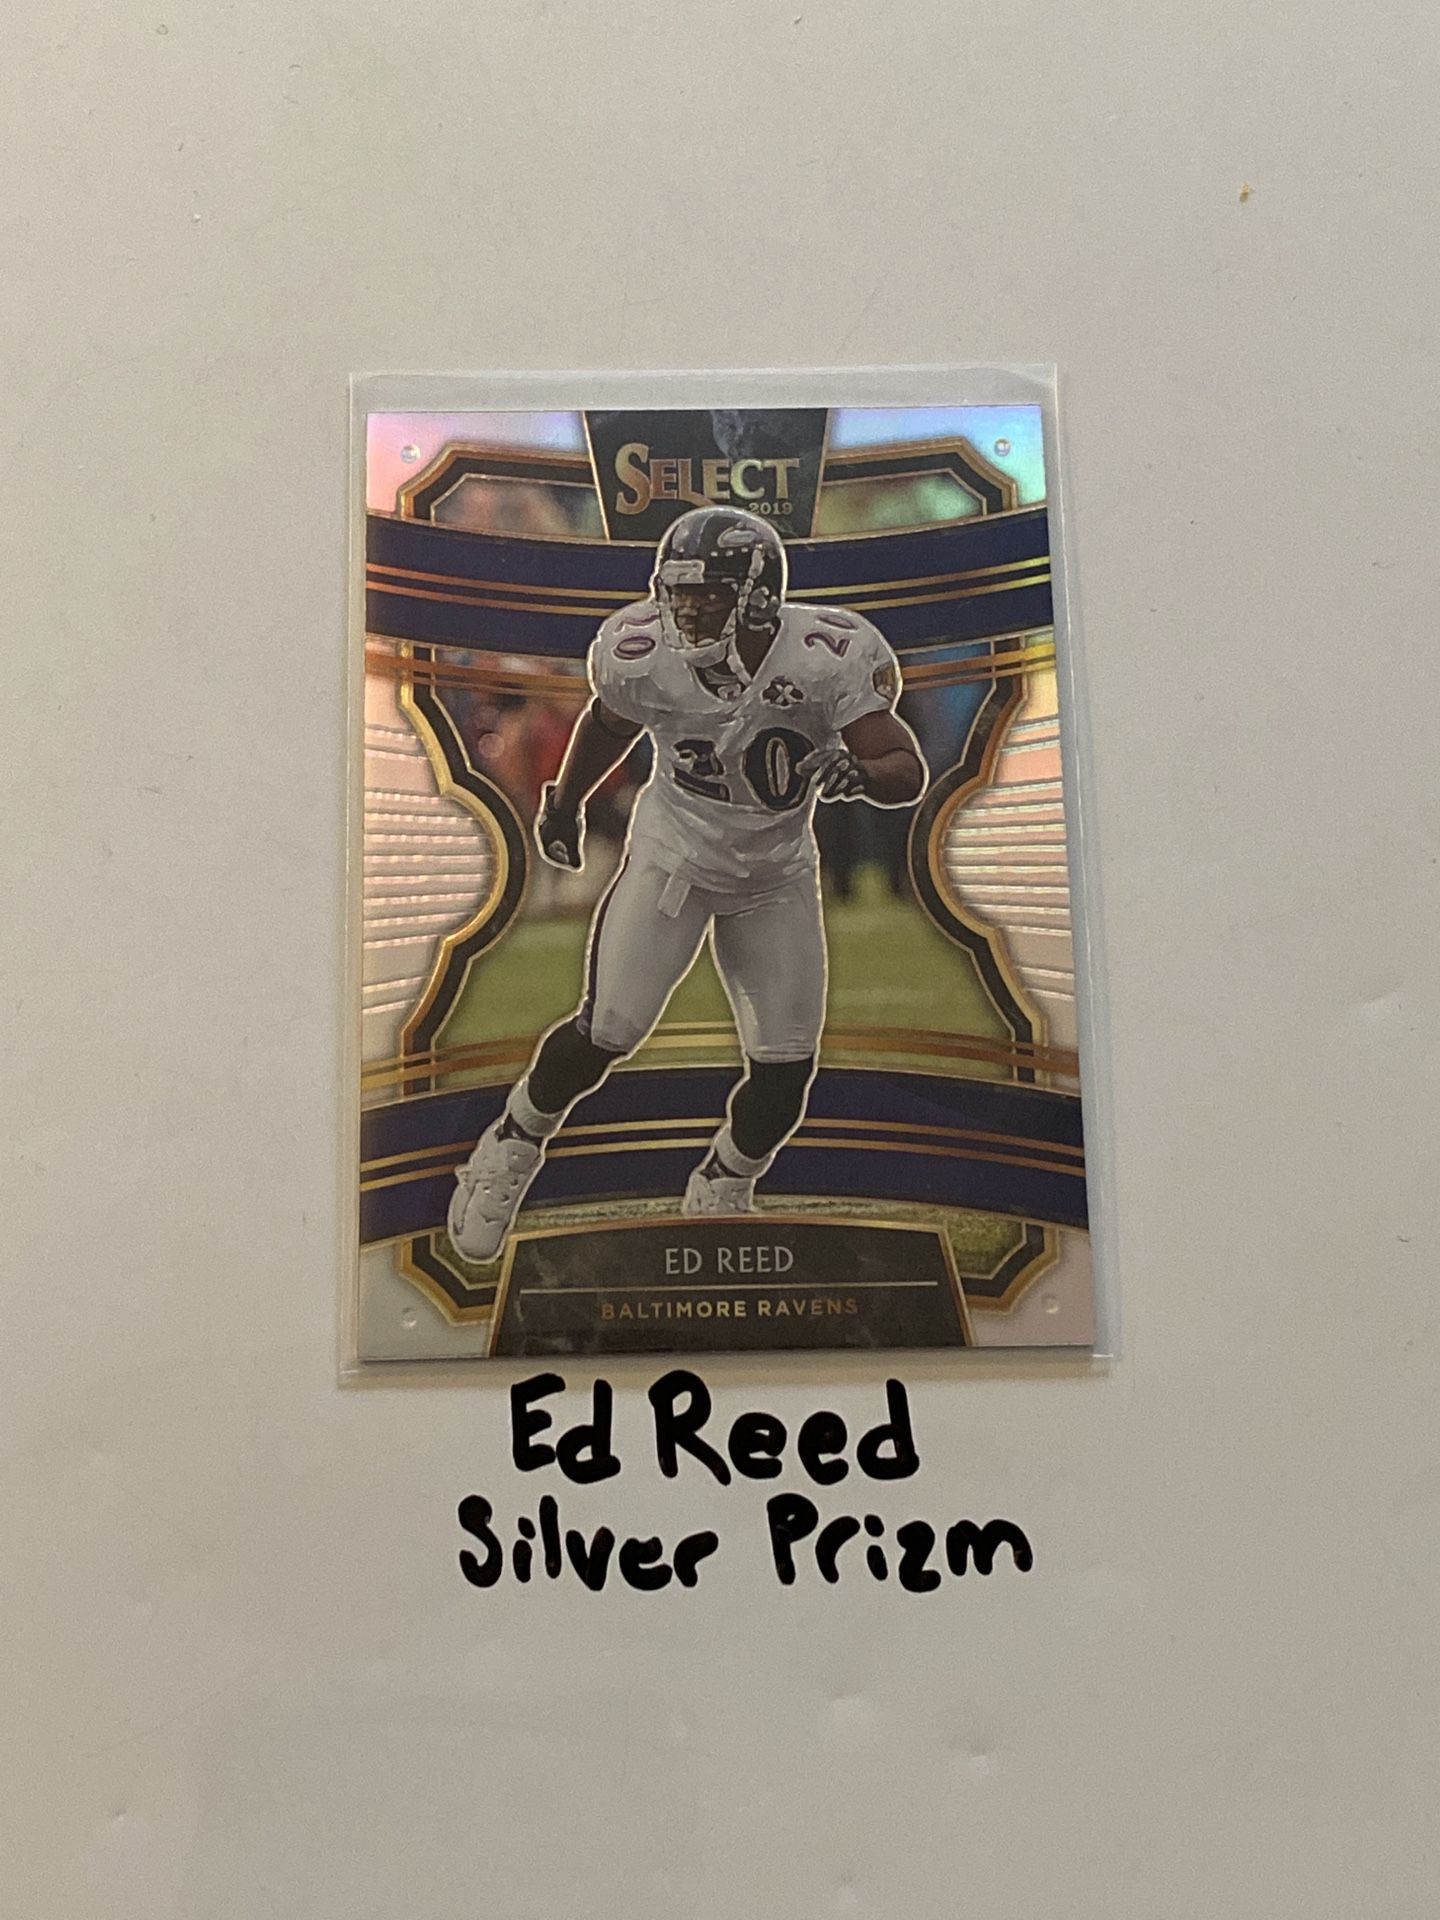 Ed Reed Baltimore Ravens Hall of Fame Safety Short Print Silver Prizm Insert Card. 